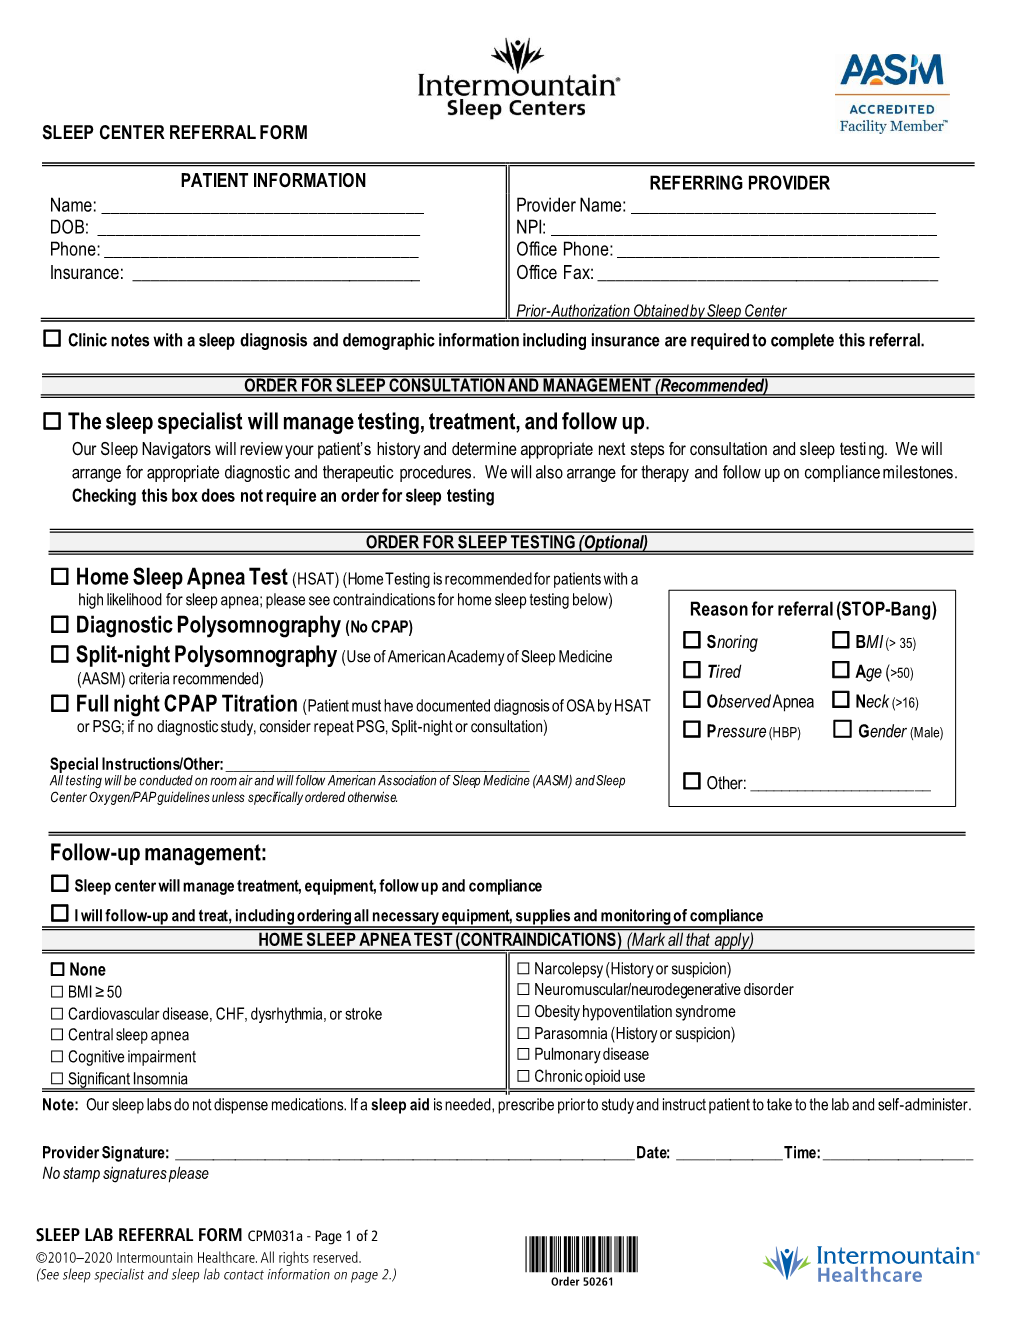 SLEEP LAB REFERRAL FORM Cpm031a - Page 1 of 2 ©2010–2020 Intermountain Healthcare